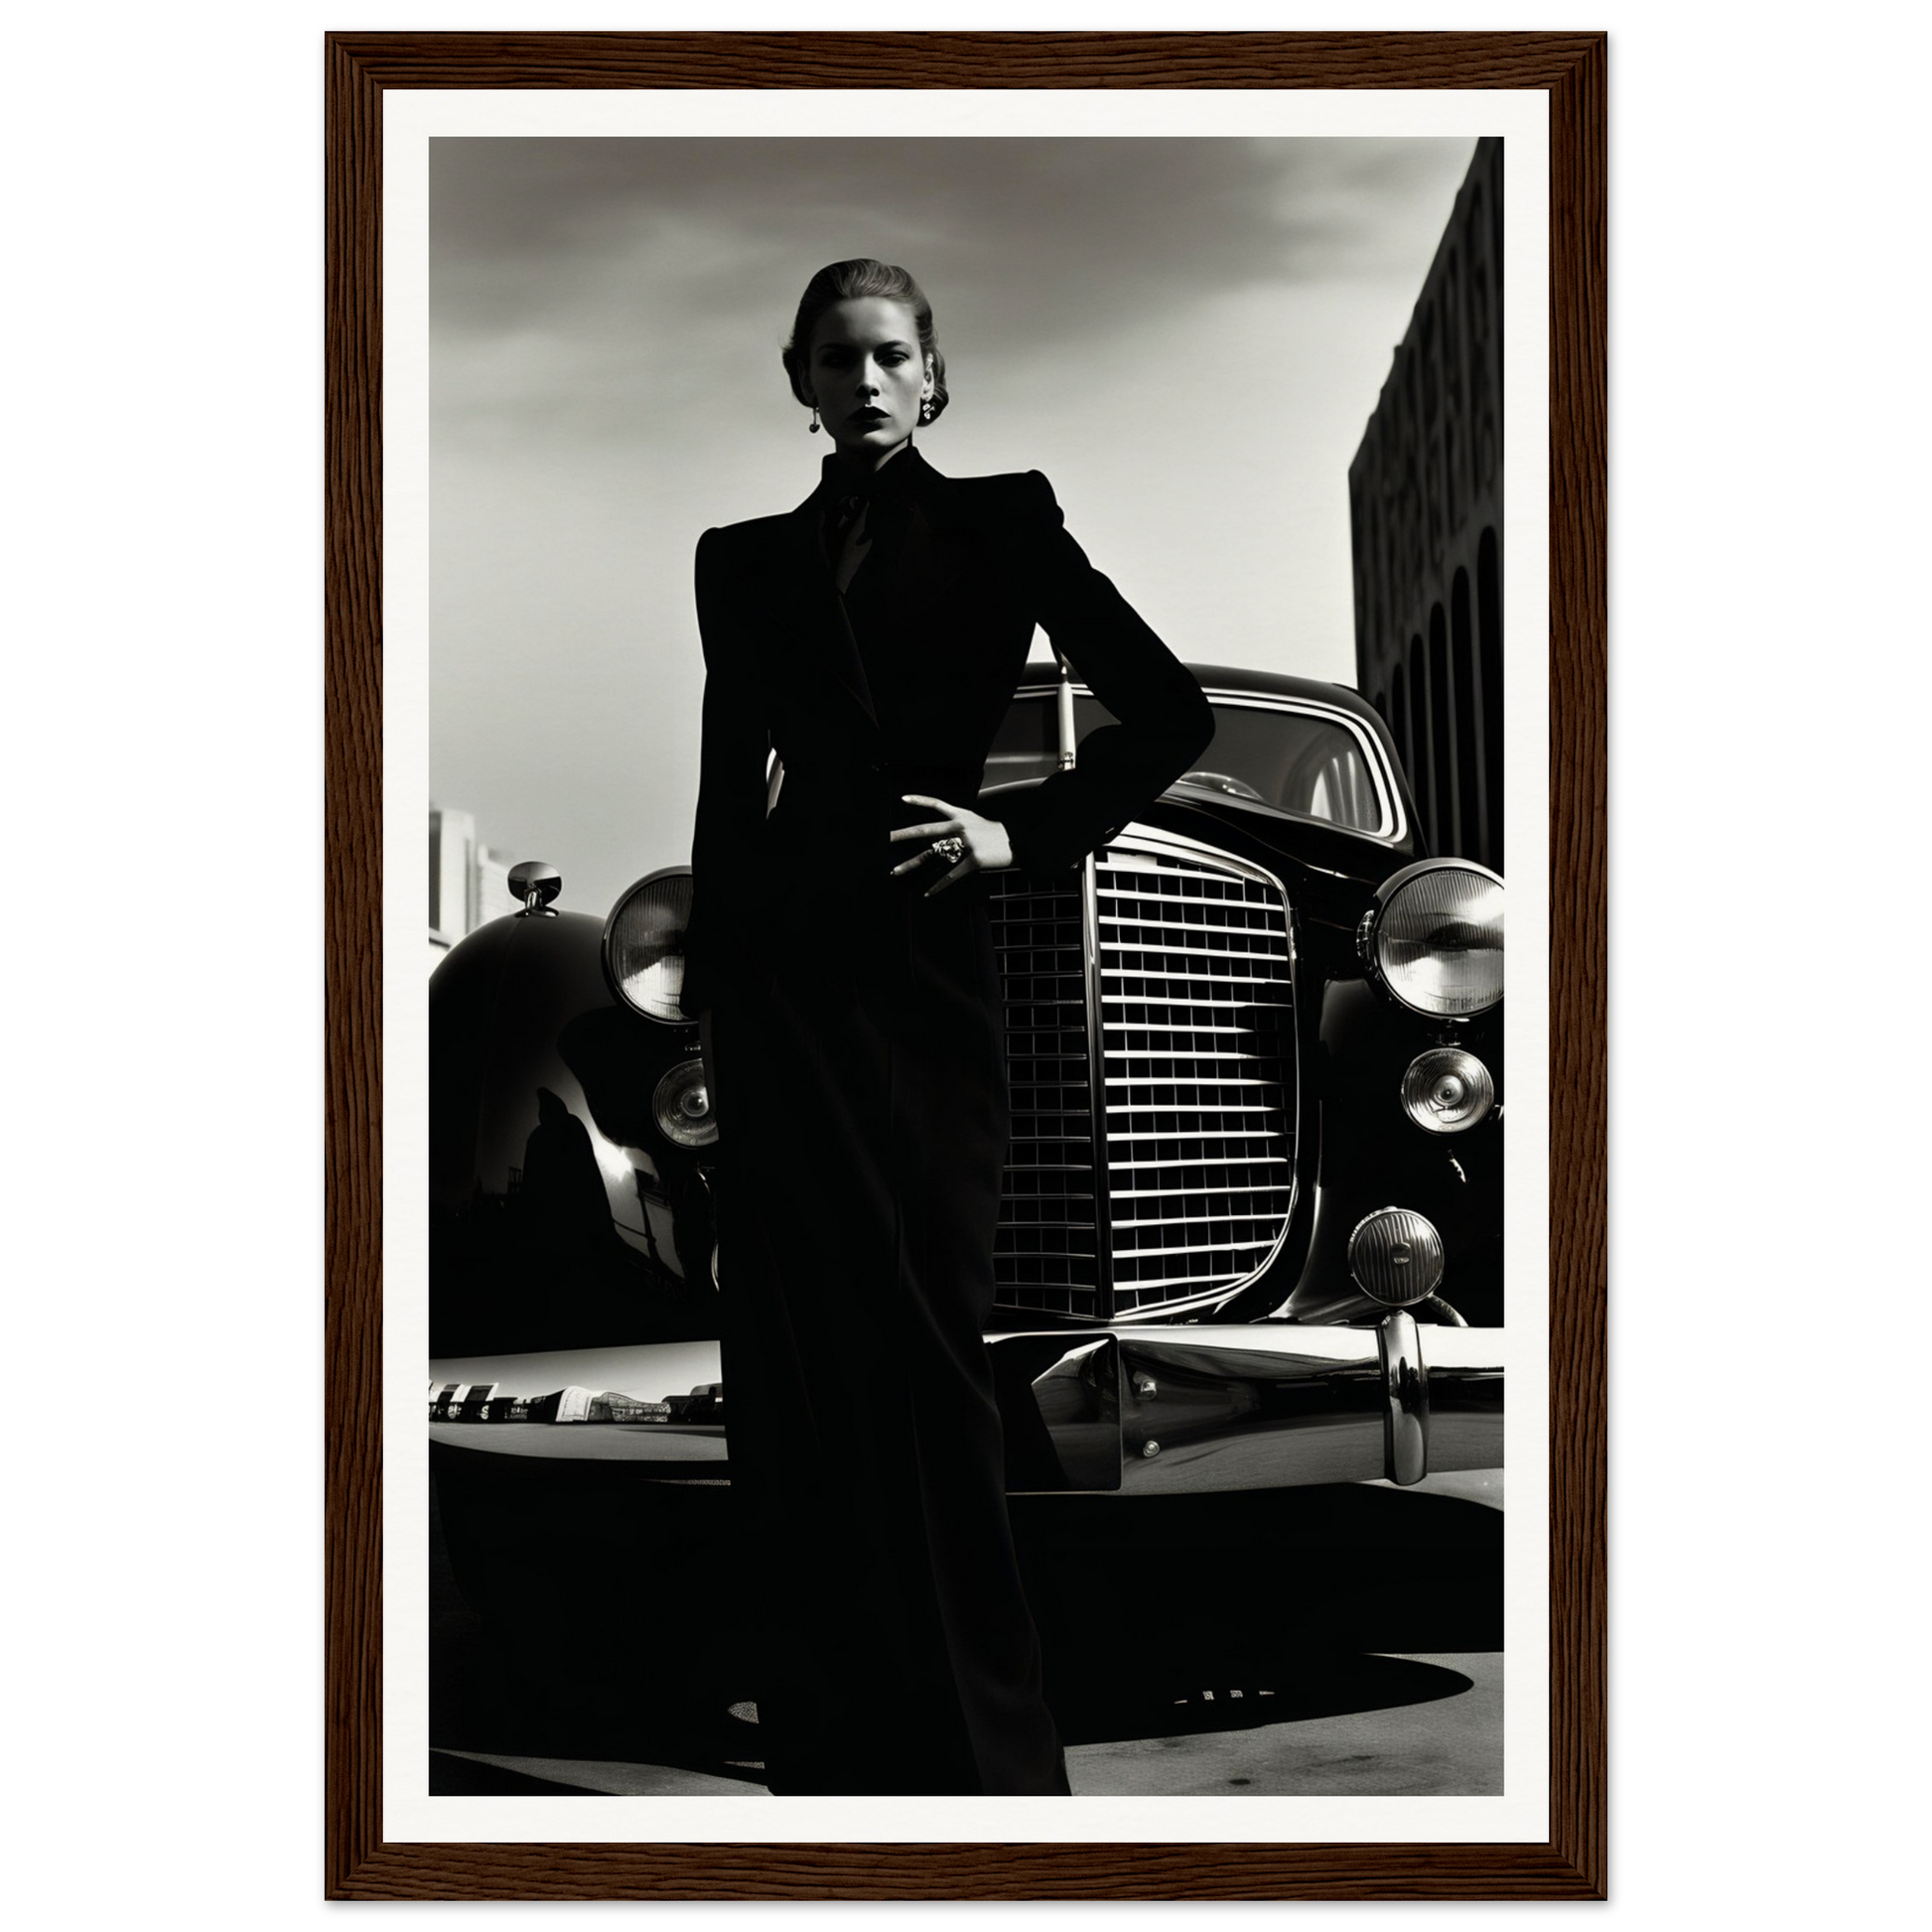 A woman standing next to an old car, perfect for a Helmut Wannabe The Edge The Oracle Windows™ Collection wall art poster for my wall.